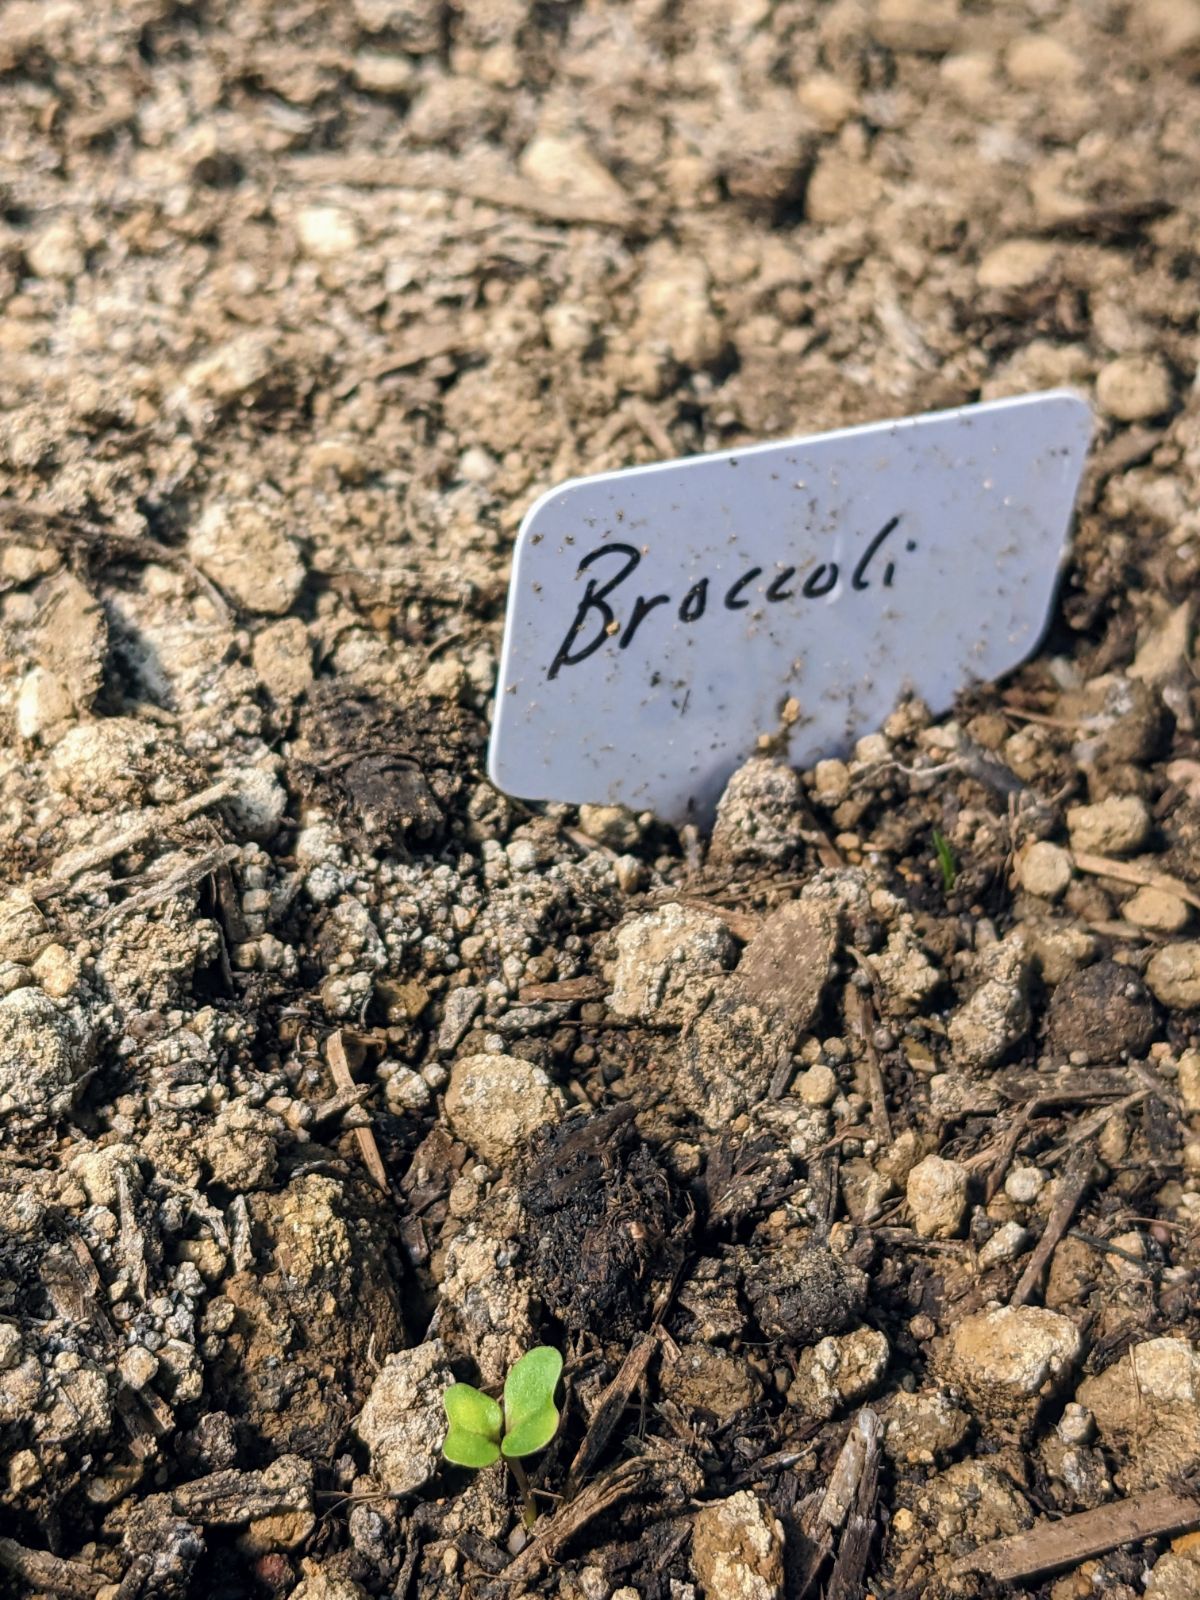 Broccoli seedlings in soil next to a "Broccoli" plant tag